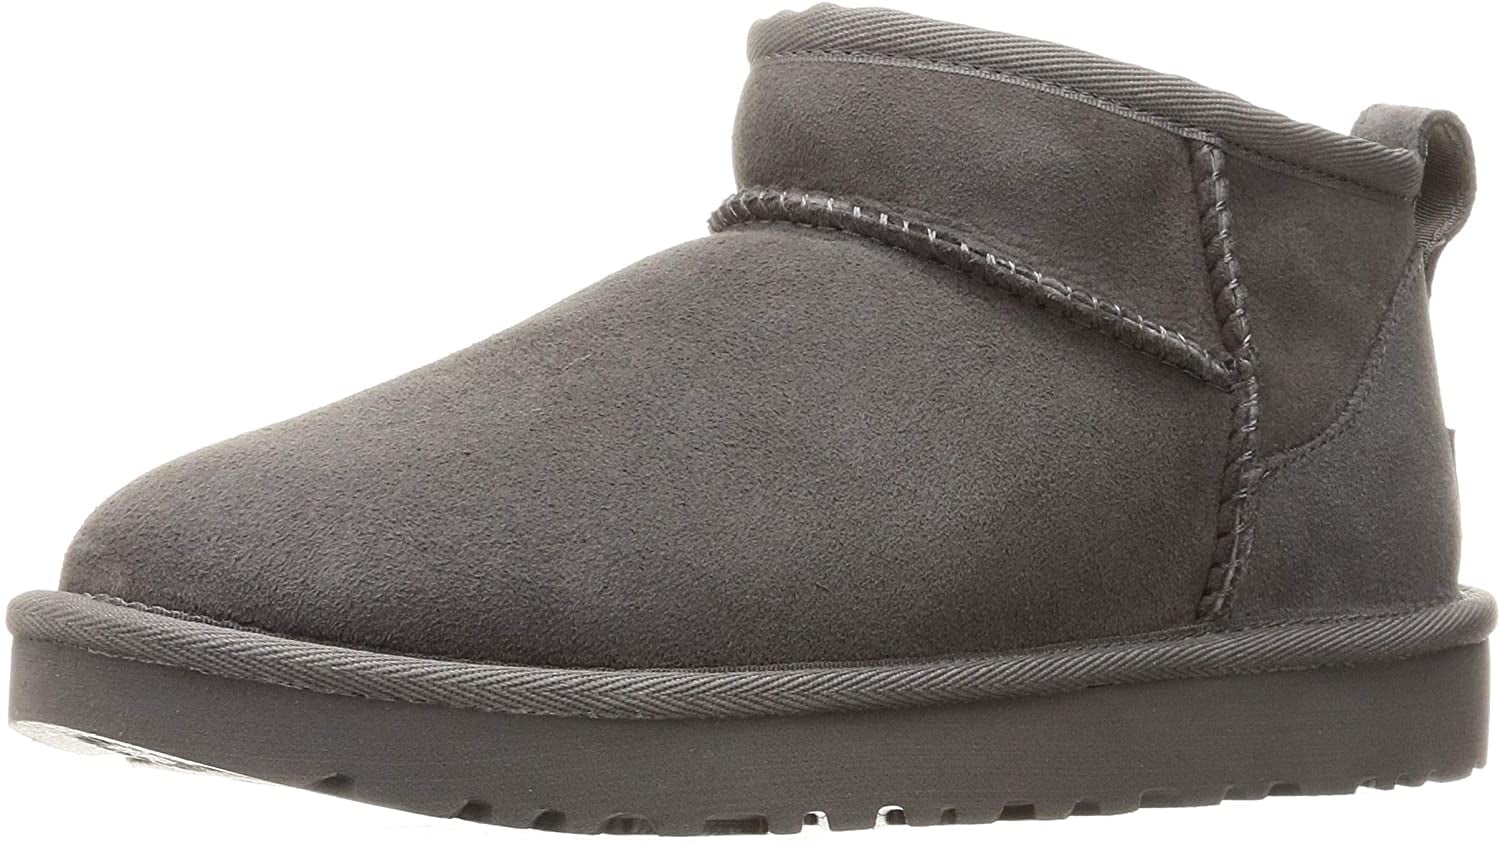 UGG Bailey Bow II Boot In Goat, 9